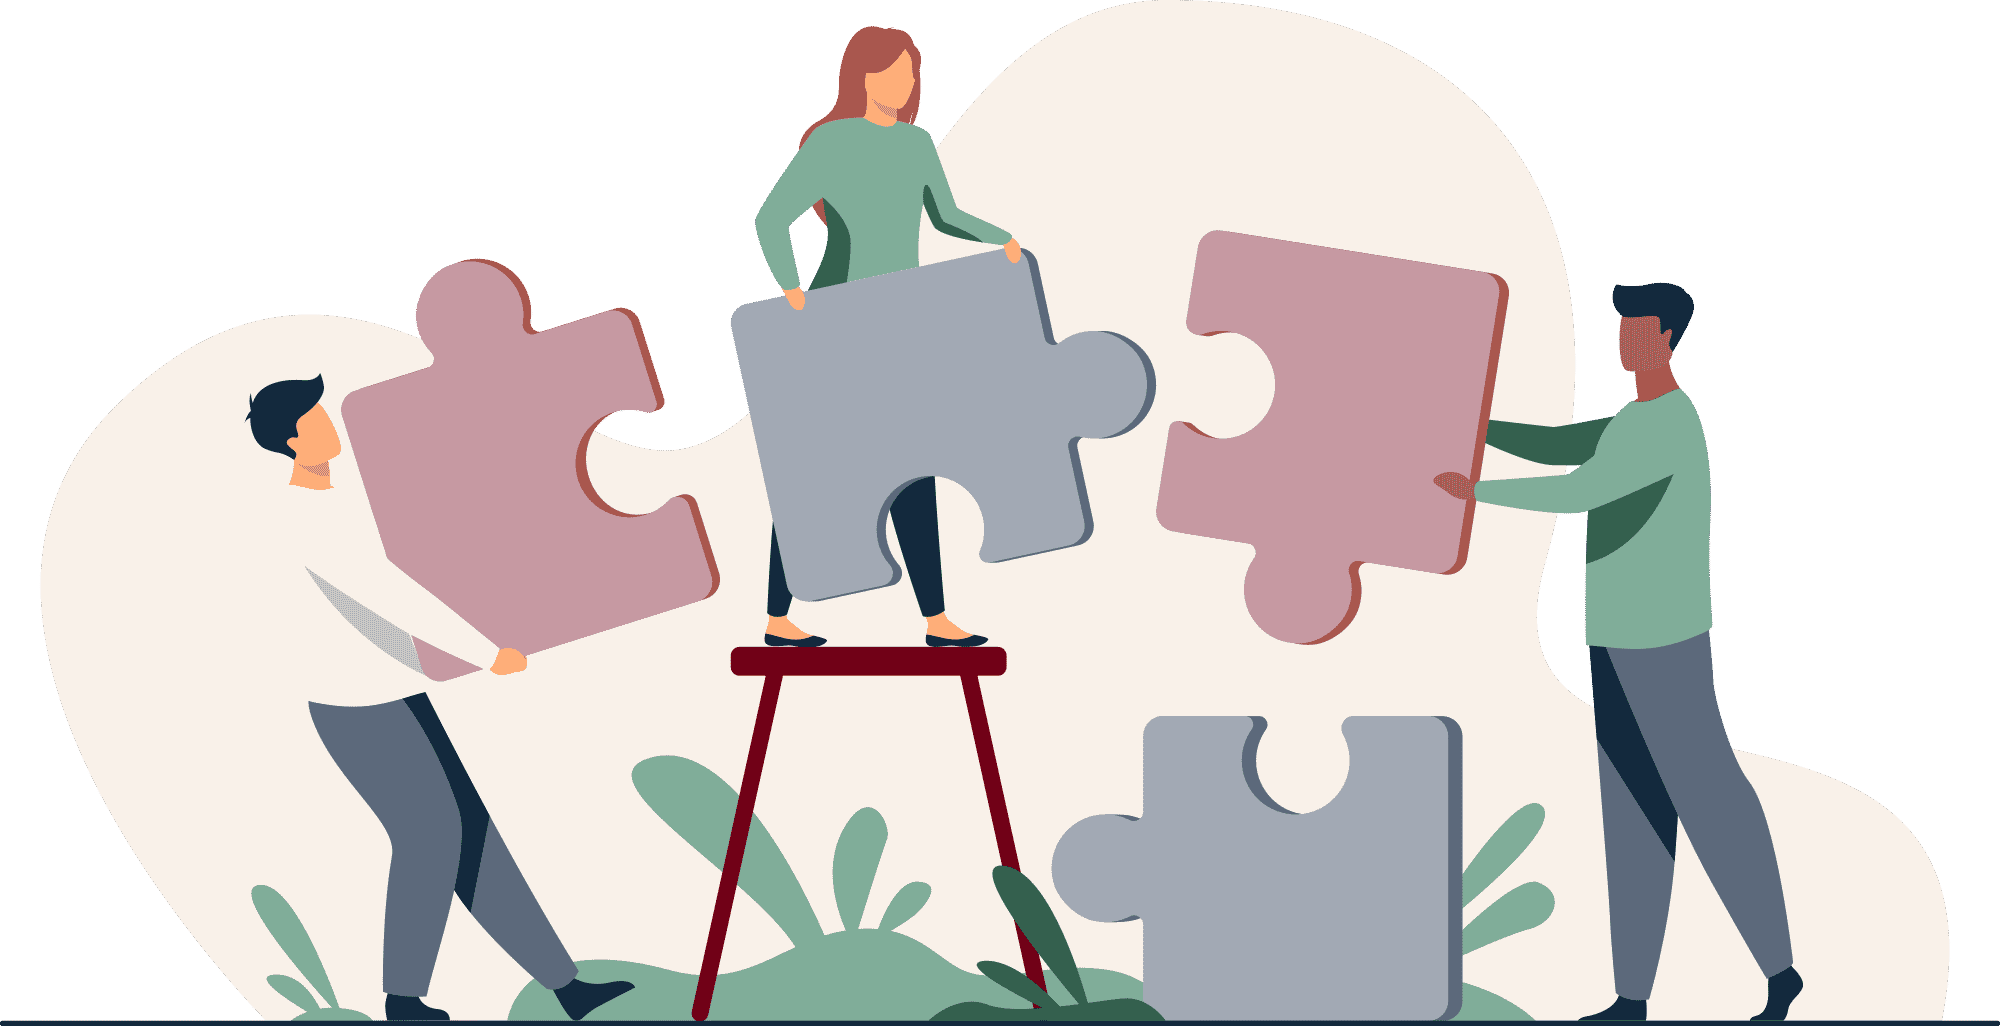 Illustration of three people assembling a big jigsaw puzzle.